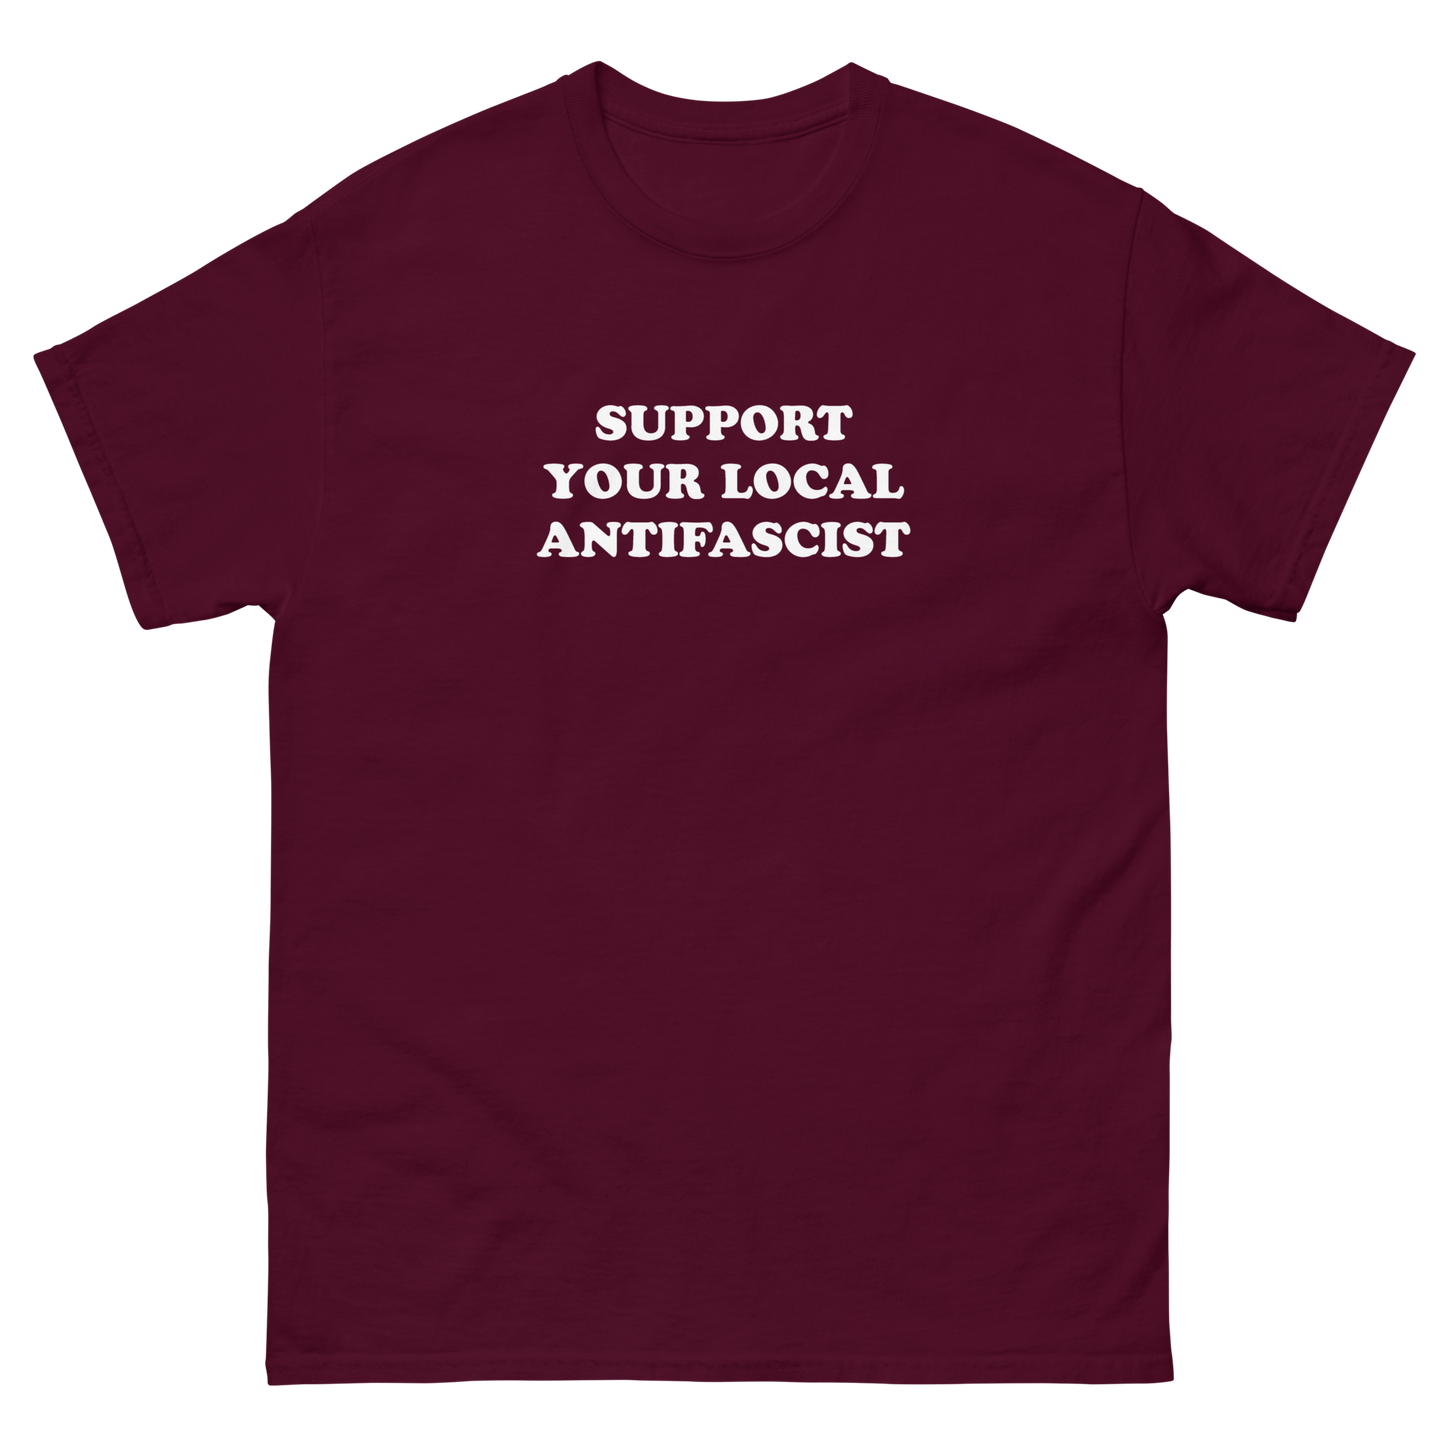 Stealworks "Support Your Local Antifascist" T-shirt